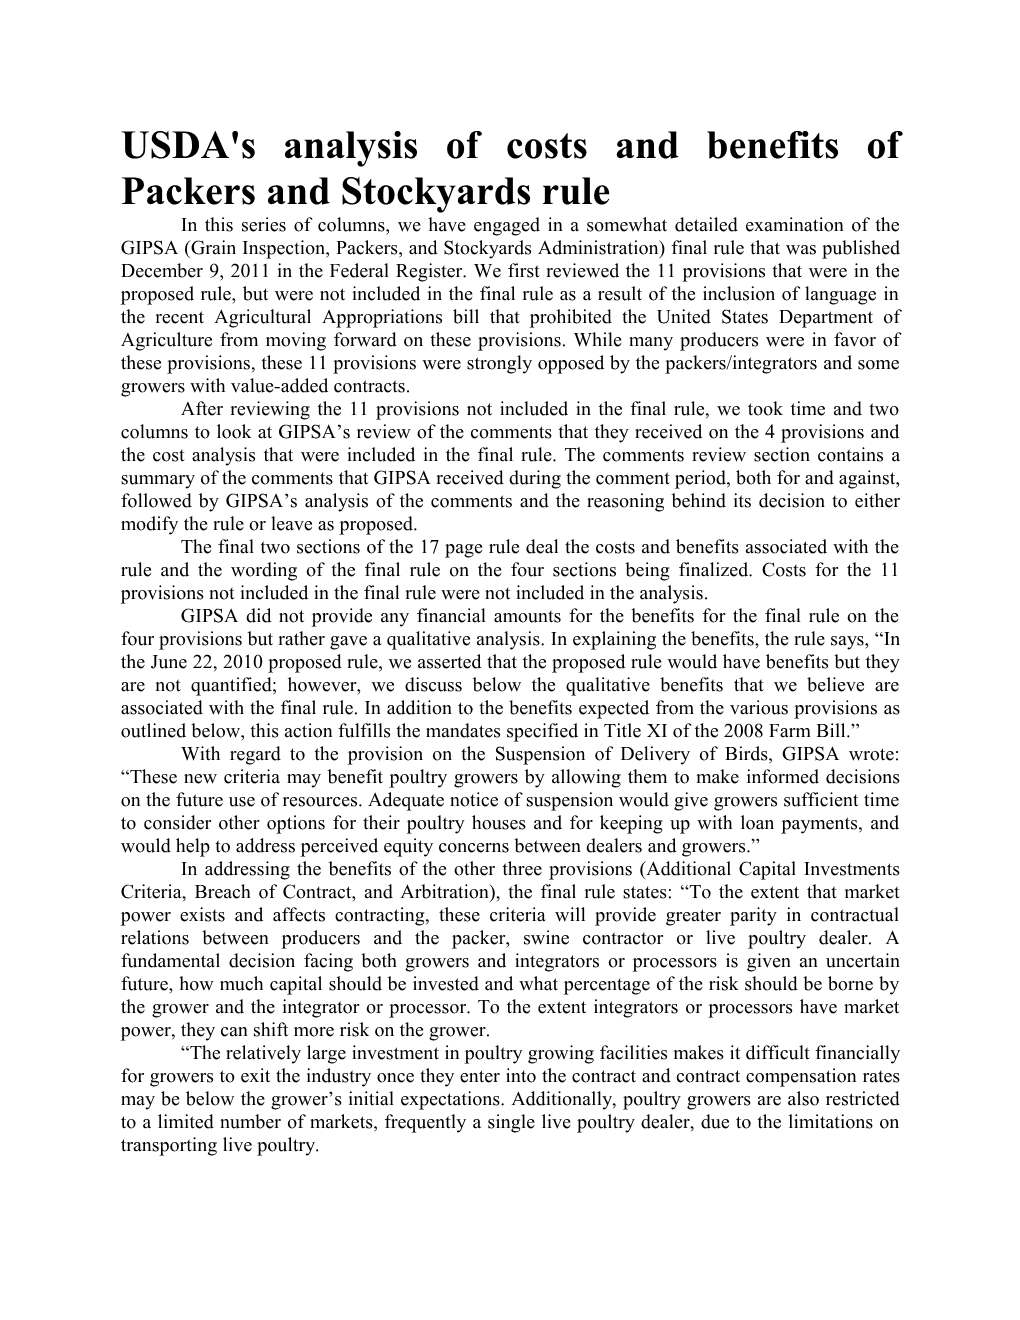 USDA's Analysis of Costs and Benefits of Packers and Stockyards Rule